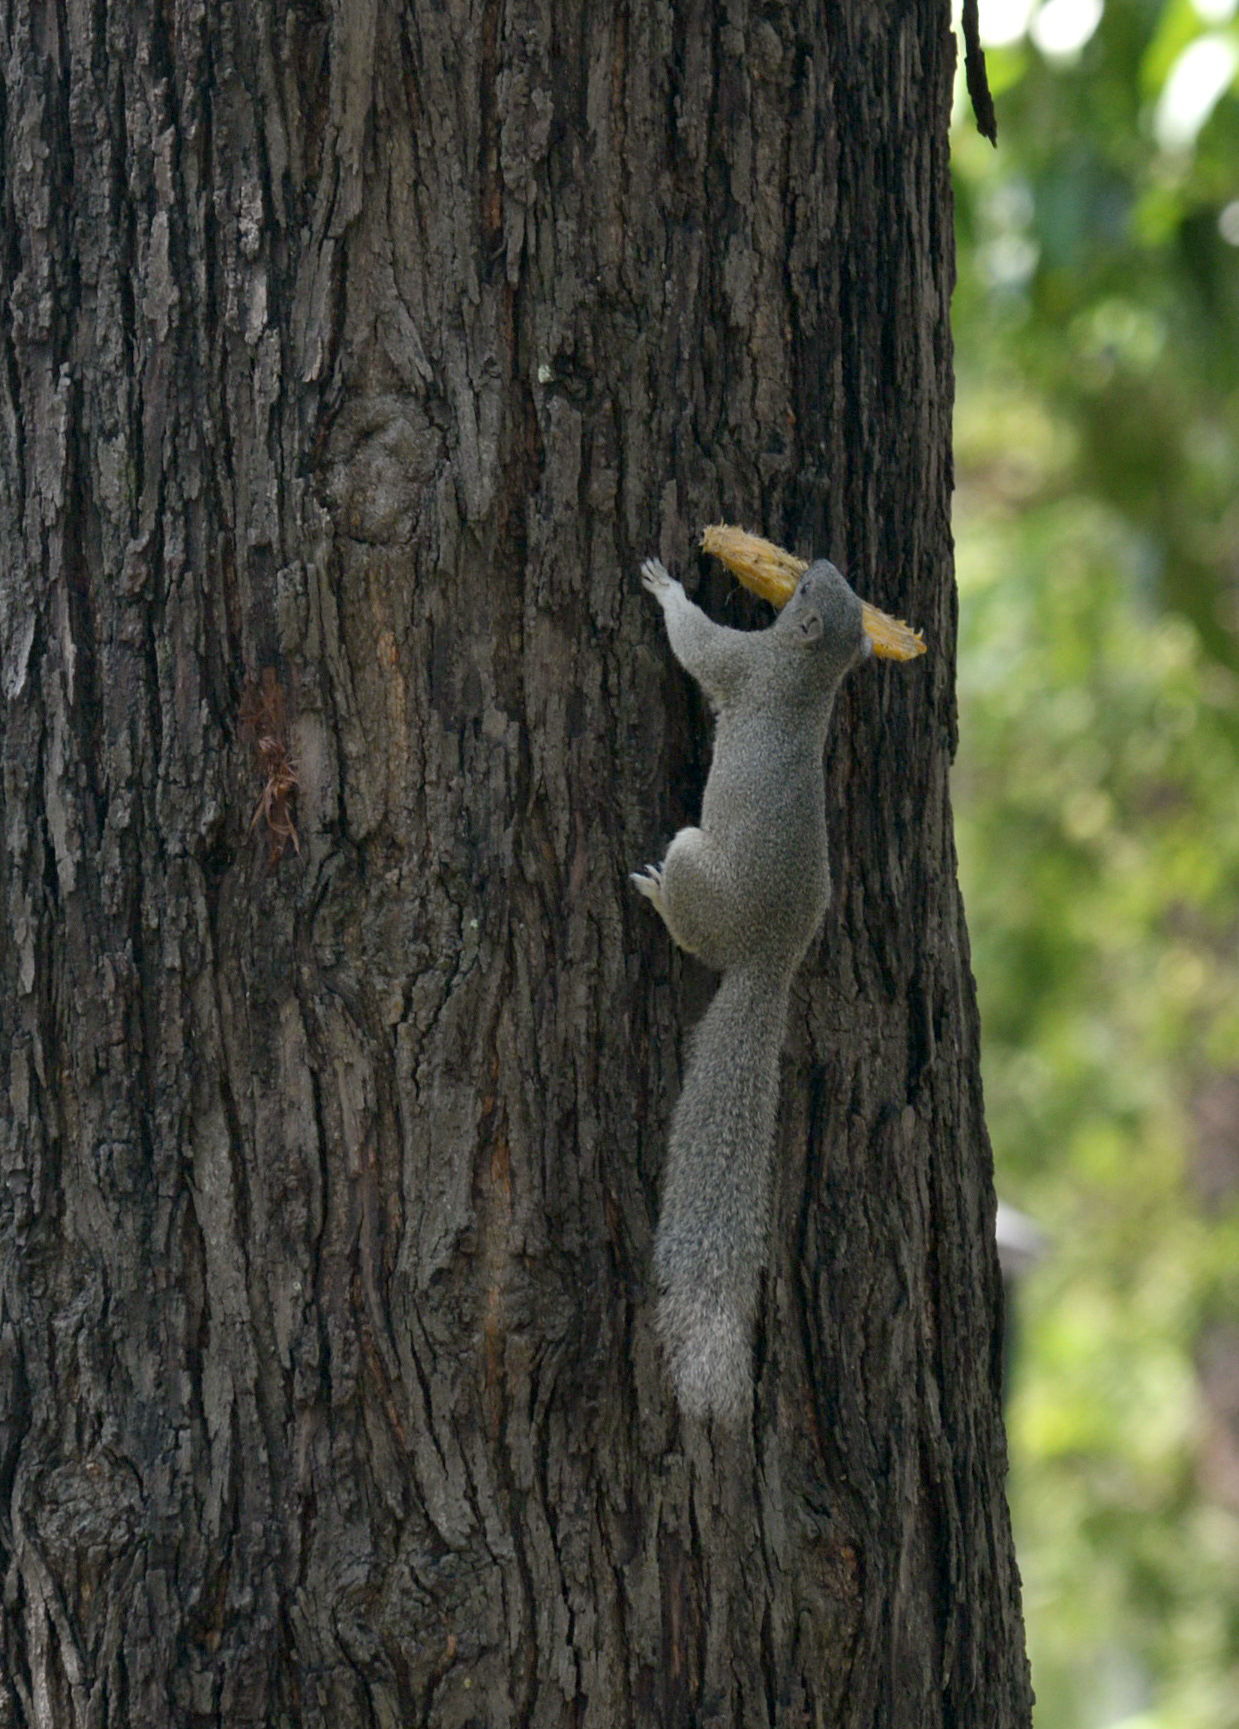 A squirrel is seen in April 30 Park in Ho Chi Minh City, Vietnam. Photo: T.T.D. / Tuoi Tre